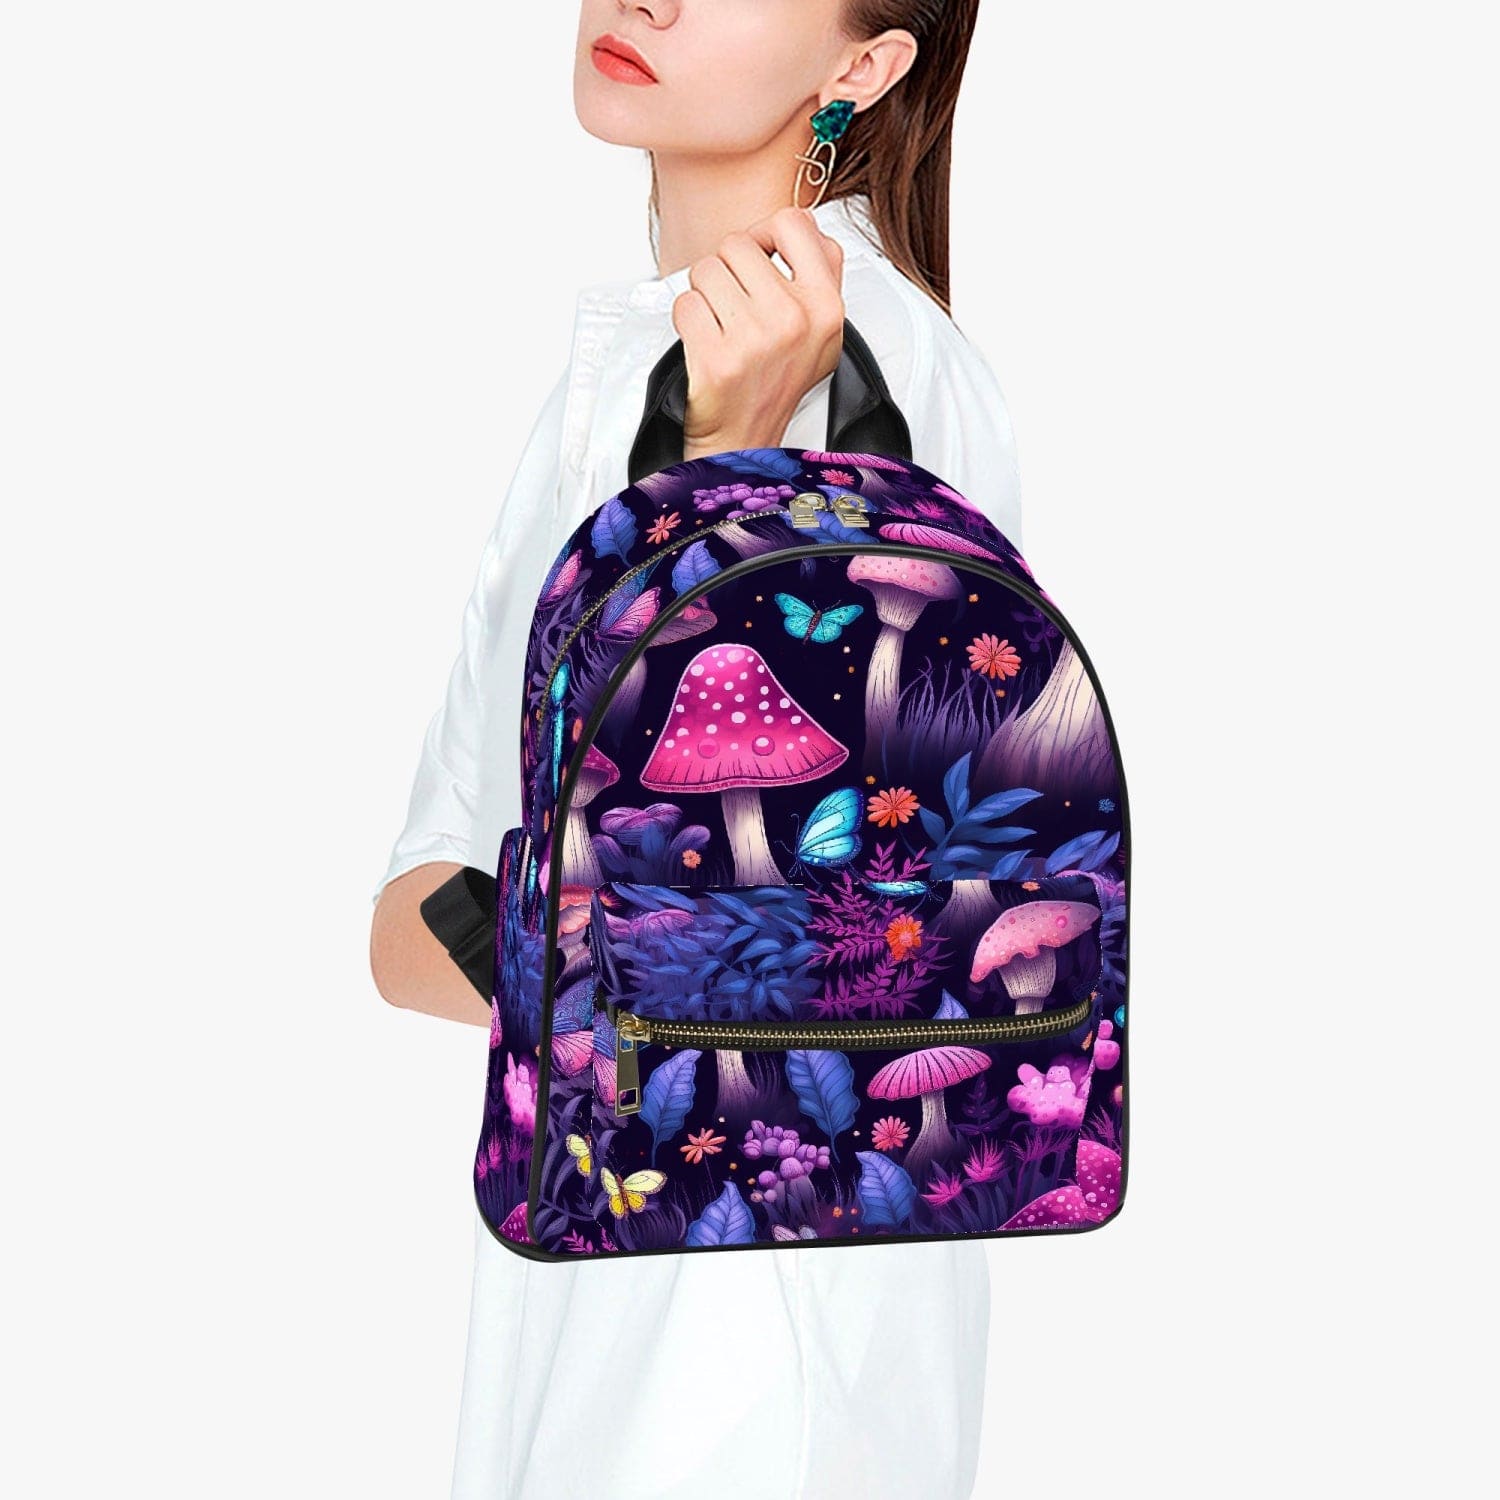 biology student carrying the backpack featuring a midnight garden of mushroomcore bright glowing pink and purple mushrooms printed on strong waterproof pu